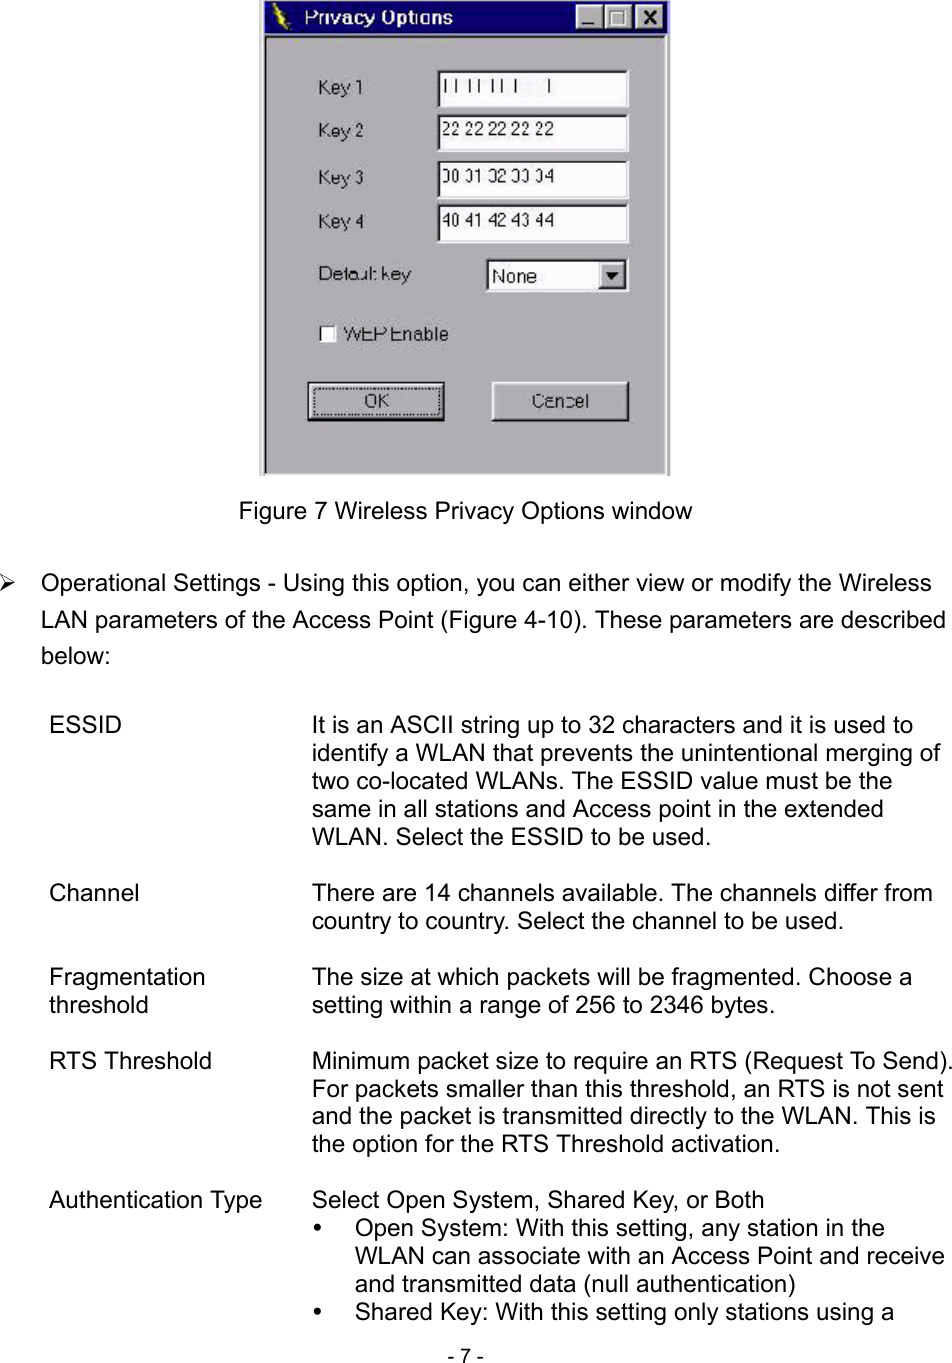 - 7 -   Figure 7 Wireless Privacy Options window   Operational Settings - Using this option, you can either view or modify the Wireless LAN parameters of the Access Point (Figure 4-10). These parameters are described below:  ESSID  It is an ASCII string up to 32 characters and it is used to identify a WLAN that prevents the unintentional merging of two co-located WLANs. The ESSID value must be the same in all stations and Access point in the extended WLAN. Select the ESSID to be used.  Channel  There are 14 channels available. The channels differ from country to country. Select the channel to be used.  Fragmentation threshold The size at which packets will be fragmented. Choose a setting within a range of 256 to 2346 bytes.  RTS Threshold  Minimum packet size to require an RTS (Request To Send). For packets smaller than this threshold, an RTS is not sent and the packet is transmitted directly to the WLAN. This is the option for the RTS Threshold activation.  Authentication Type  Select Open System, Shared Key, or Both     Open System: With this setting, any station in the WLAN can associate with an Access Point and receive and transmitted data (null authentication)   Shared Key: With this setting only stations using a 